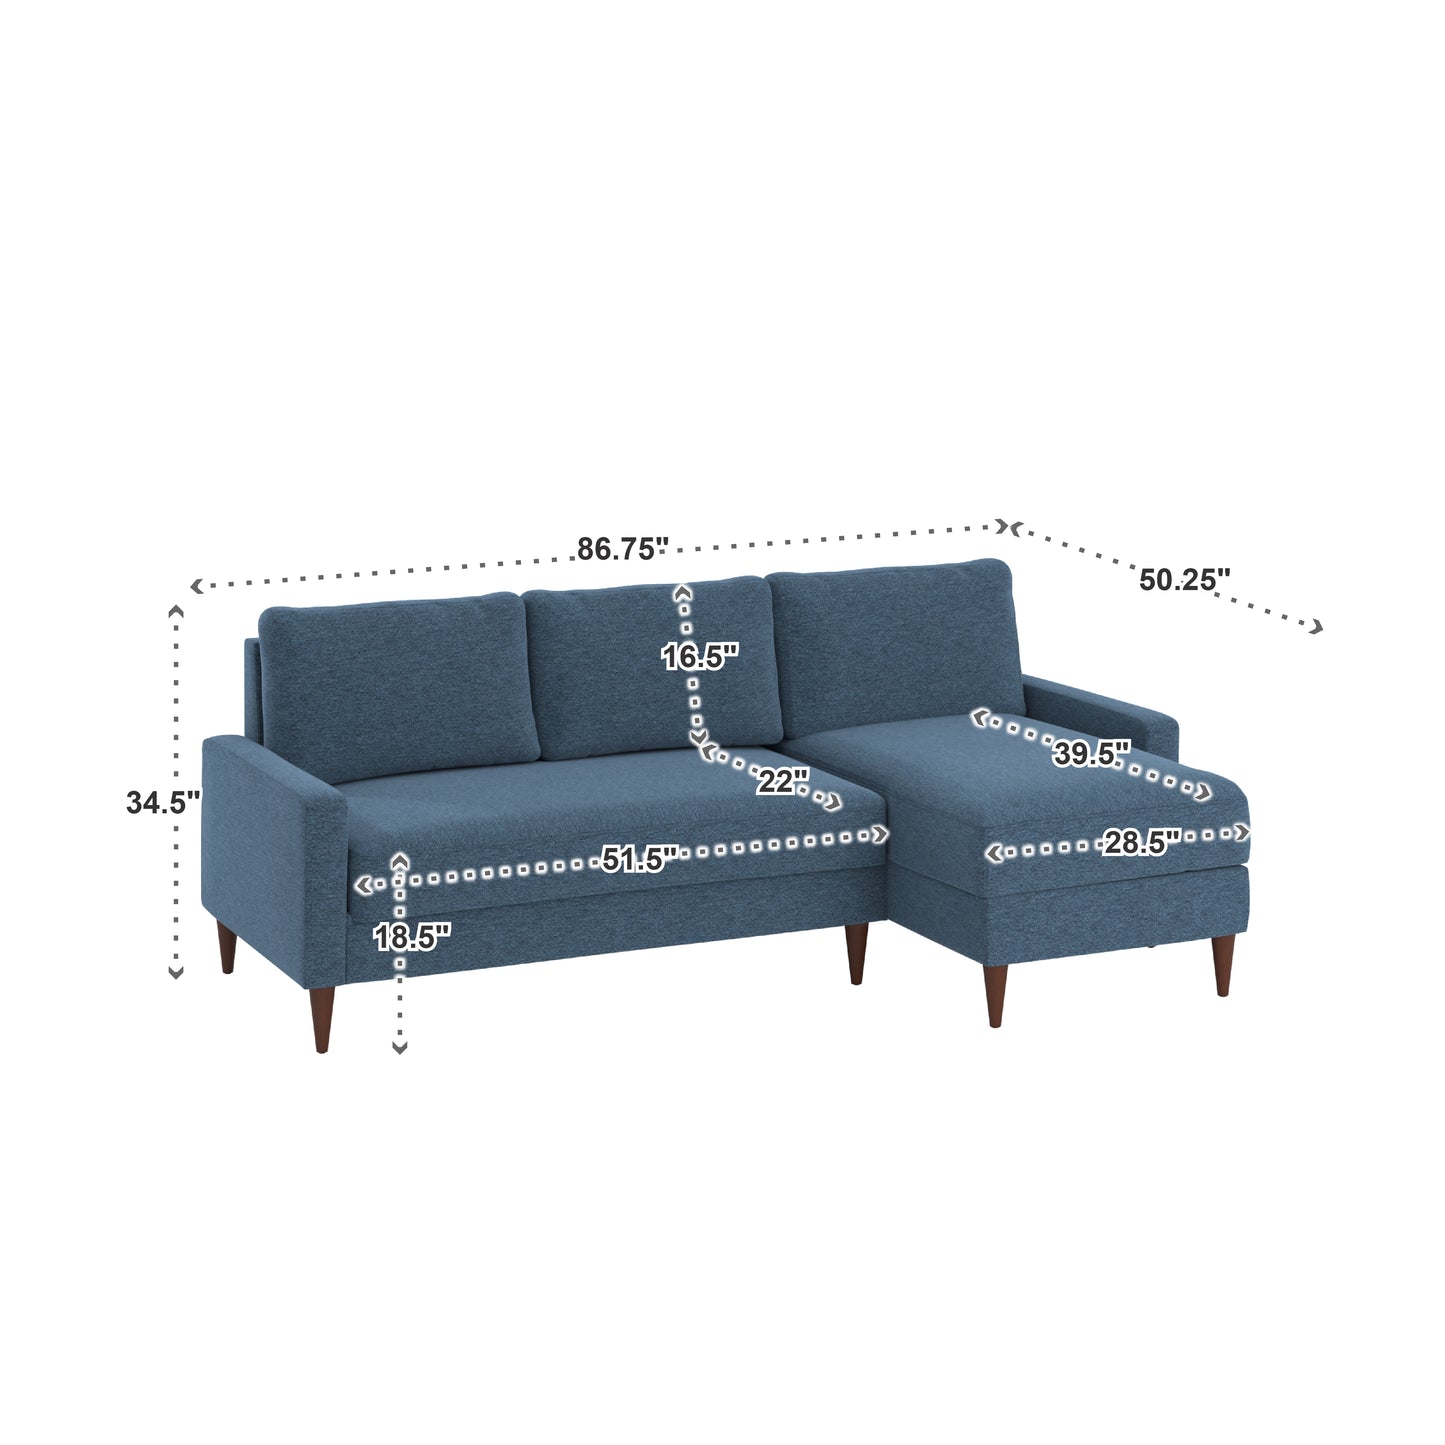 Walnut Finish Fabric Sectional Sofa with Pull-Out Bed and Storage Chaise - Blue